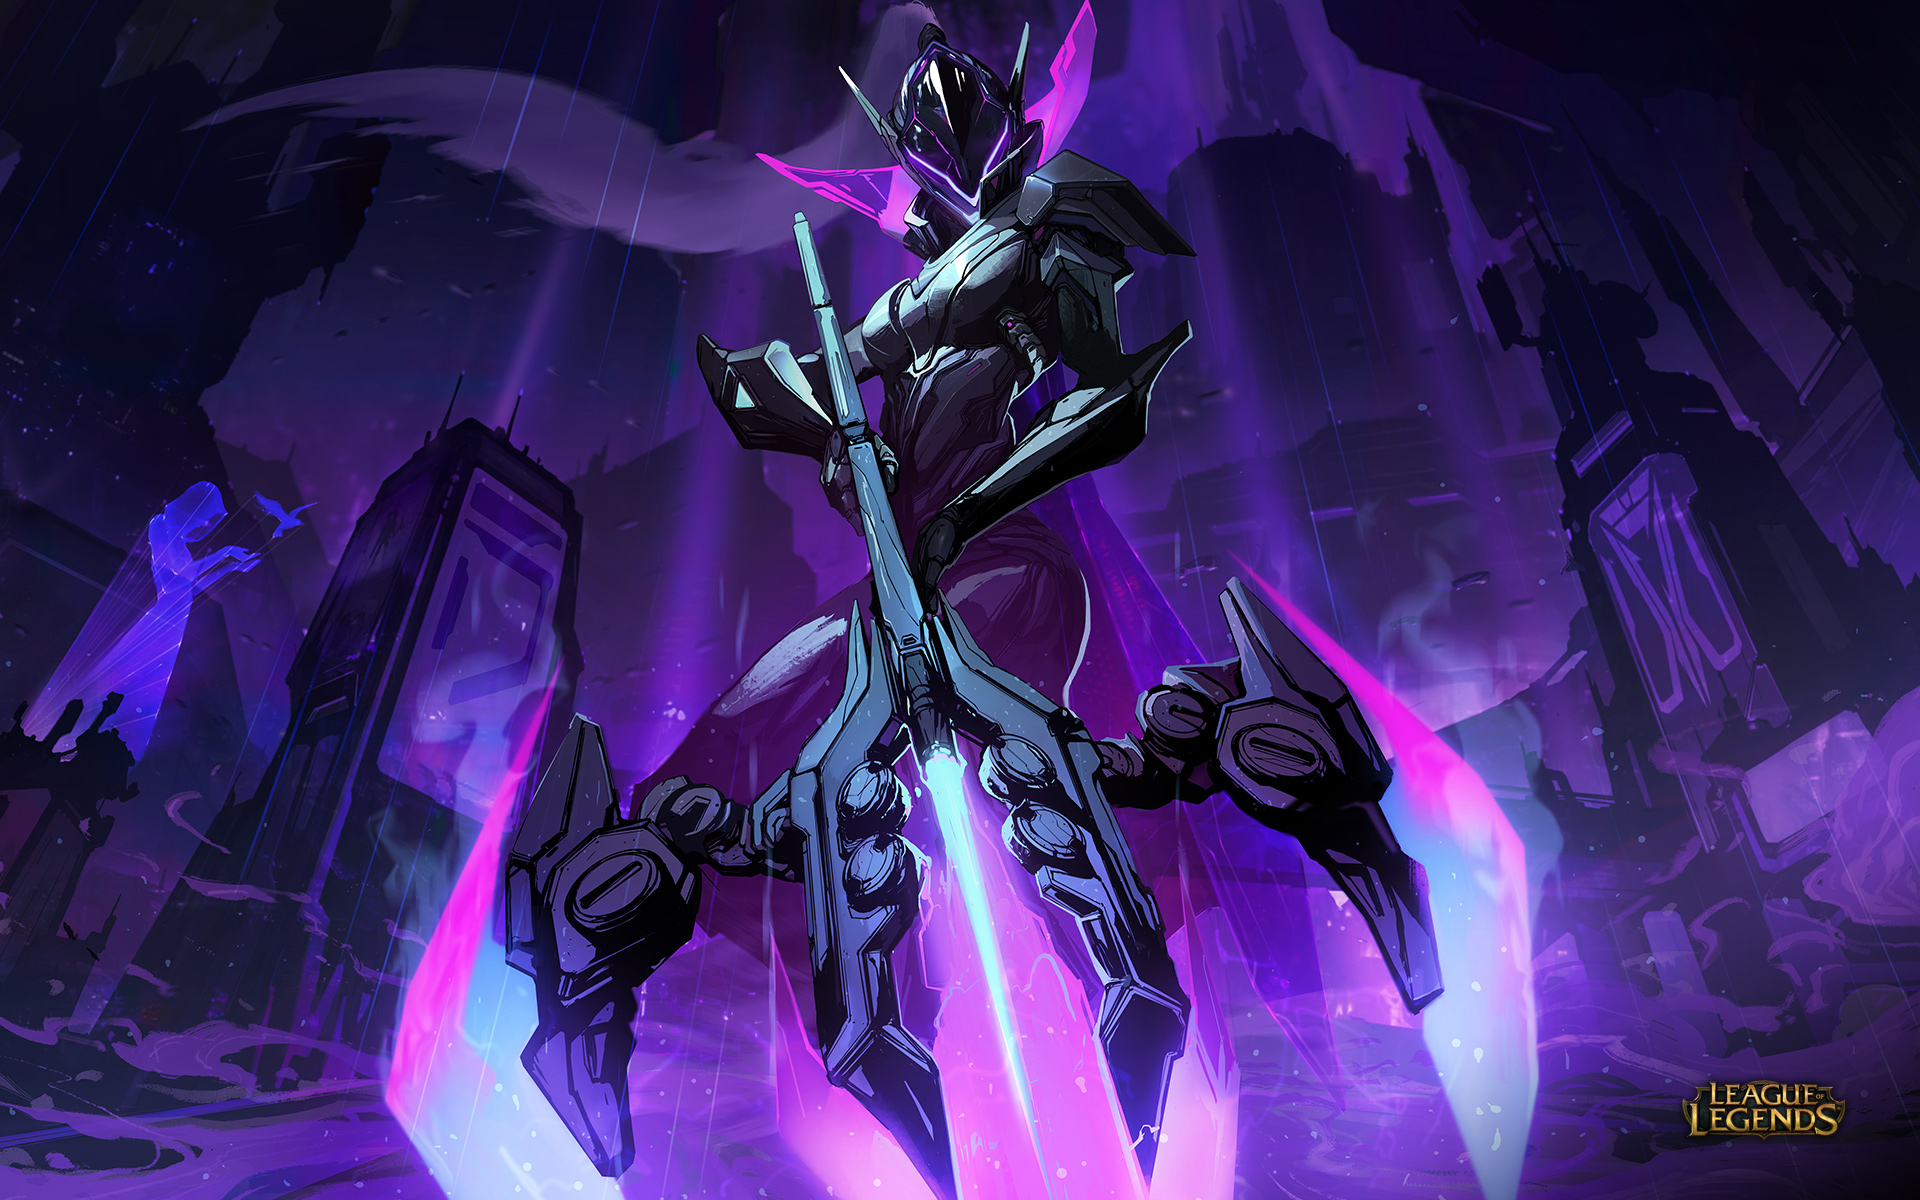 League Of Legends Summoners Rift Project Skins Vayne League Of Legends Vayne 1920x1200